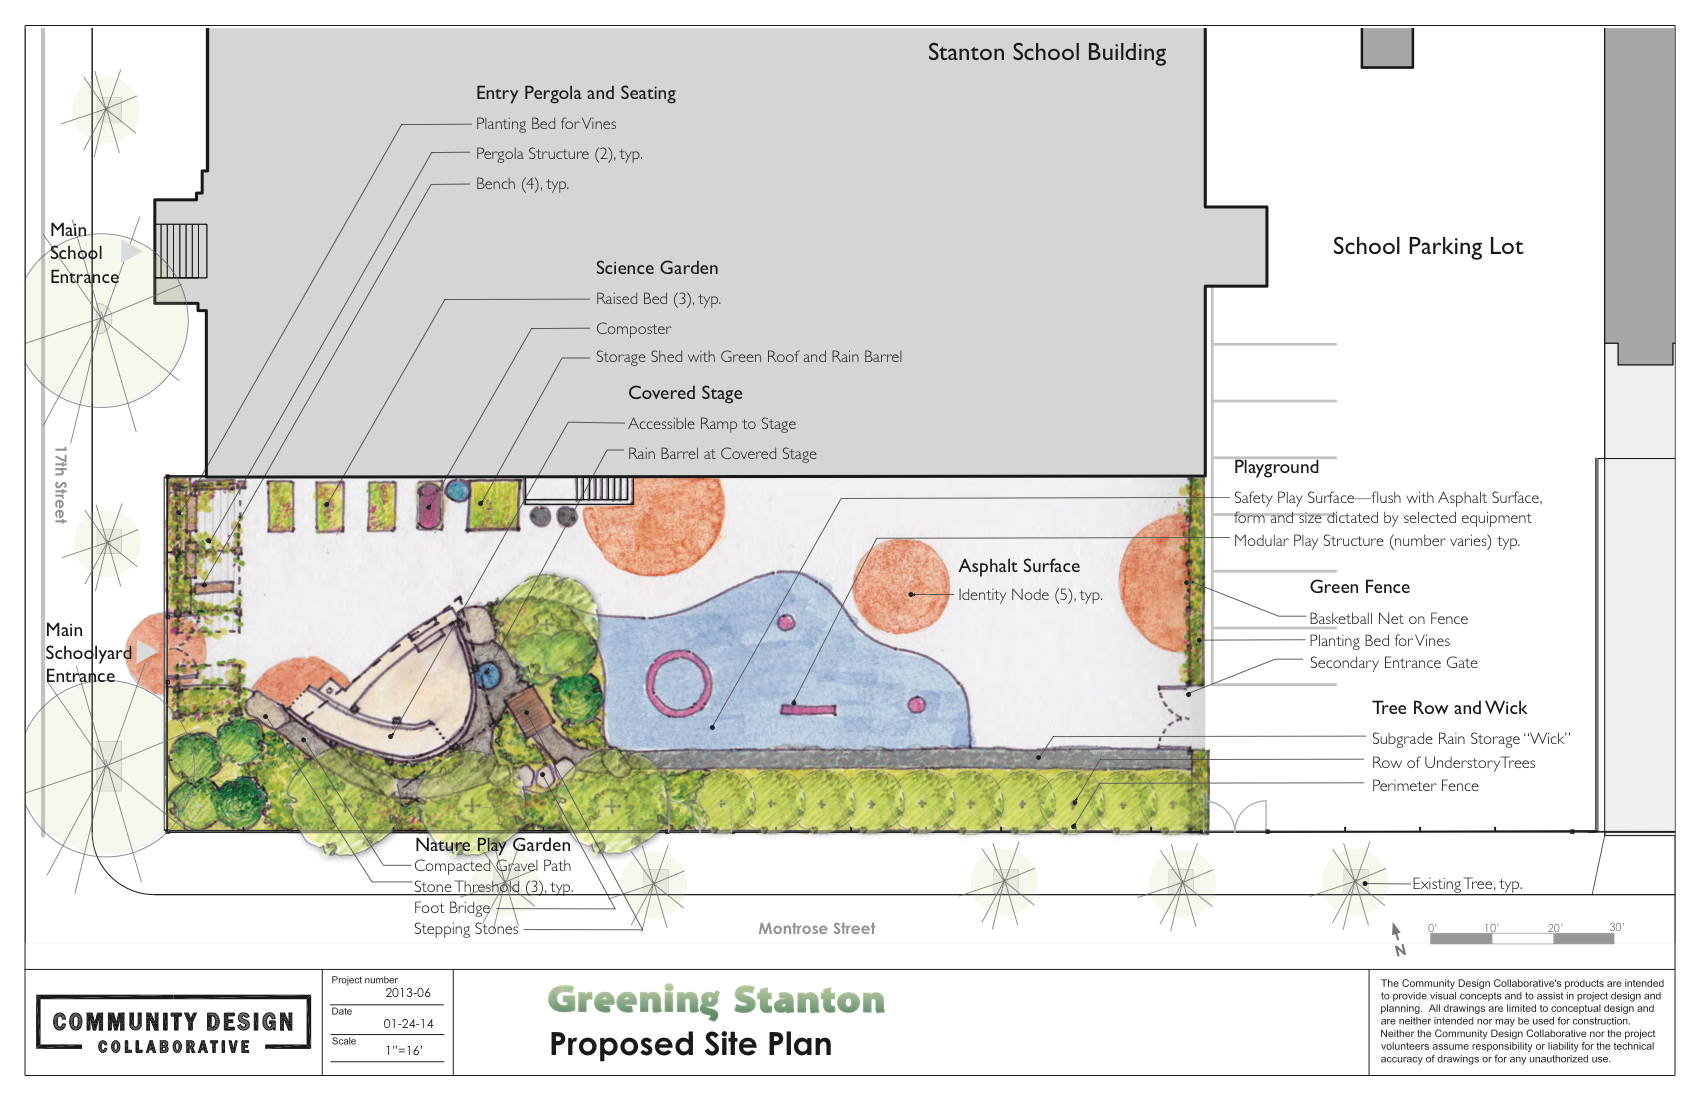 The proposed site plan for greening the Stanton Schoolyard shows a Science Garden, Nature Play, and entry pergola with seating. Credit: Community Design Collaborative